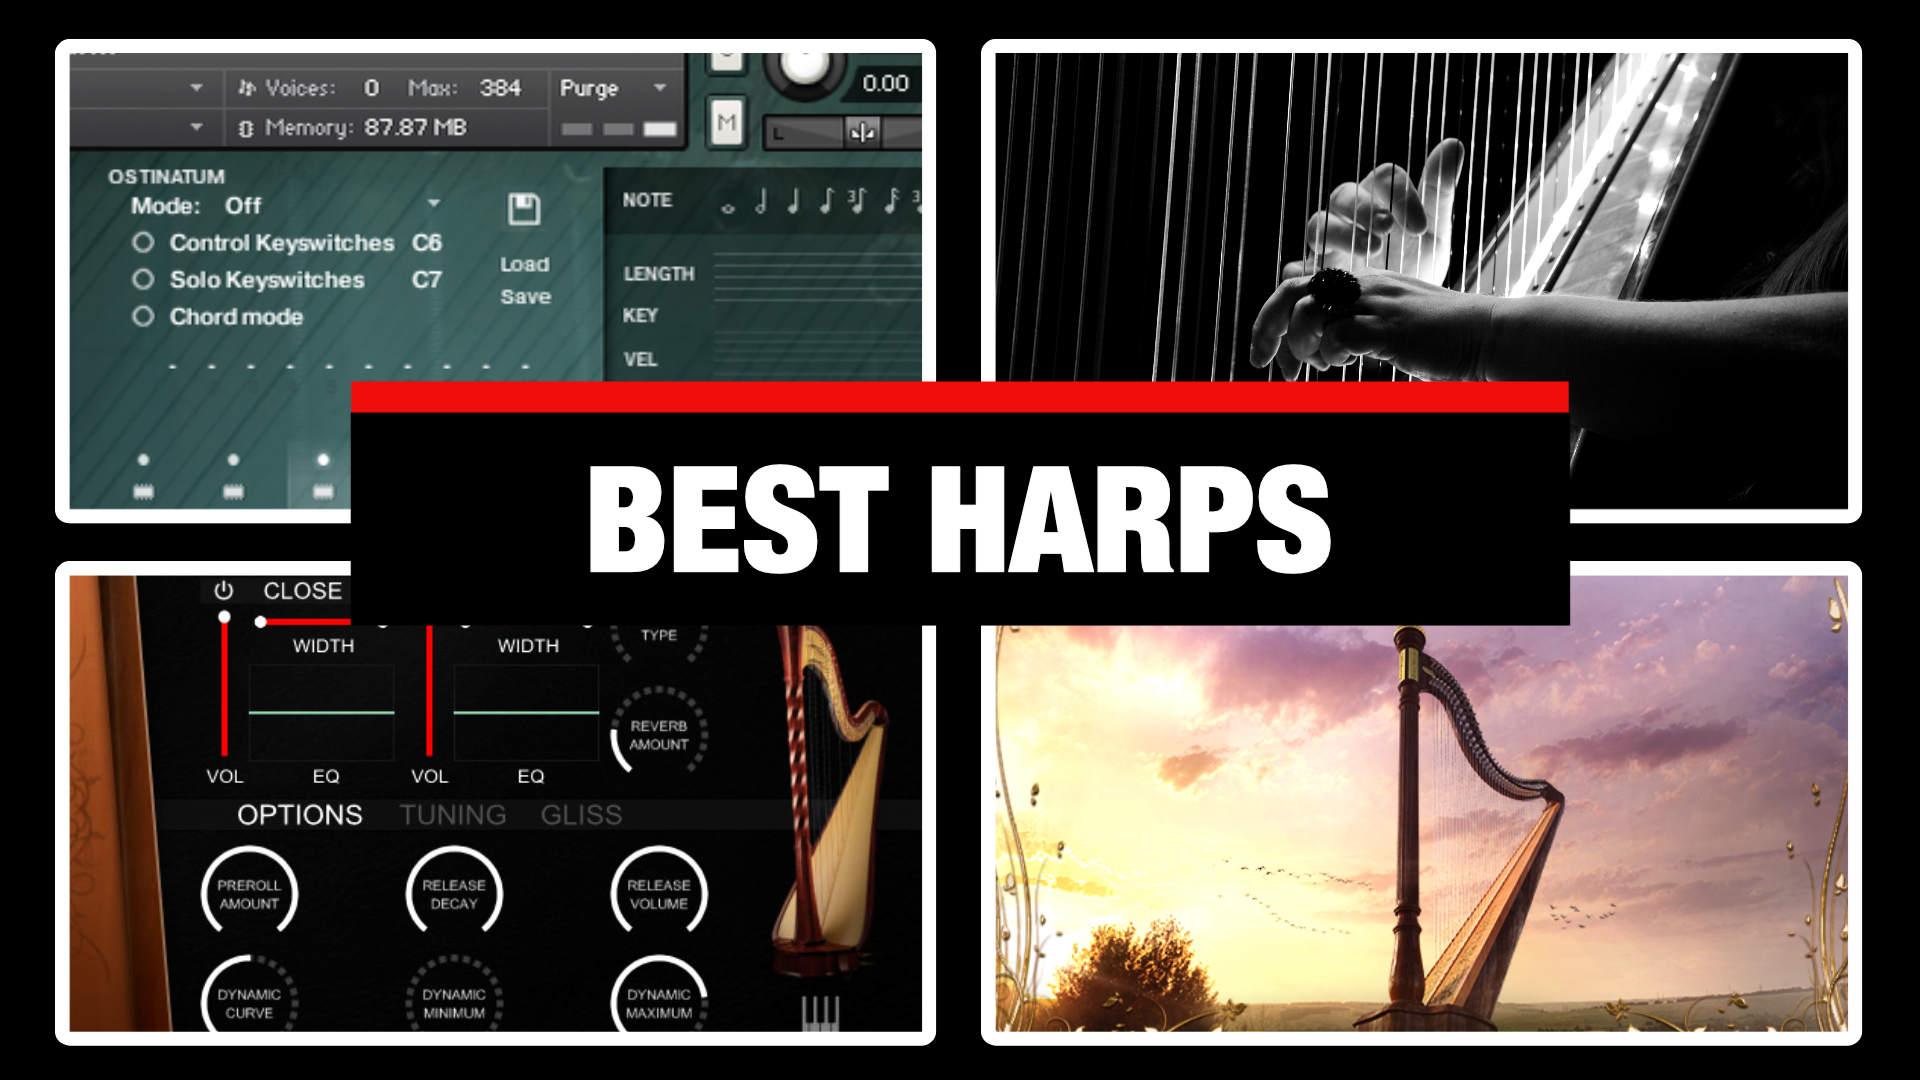 7 Best Harp VST Libraries (Top List) – Professional Composers